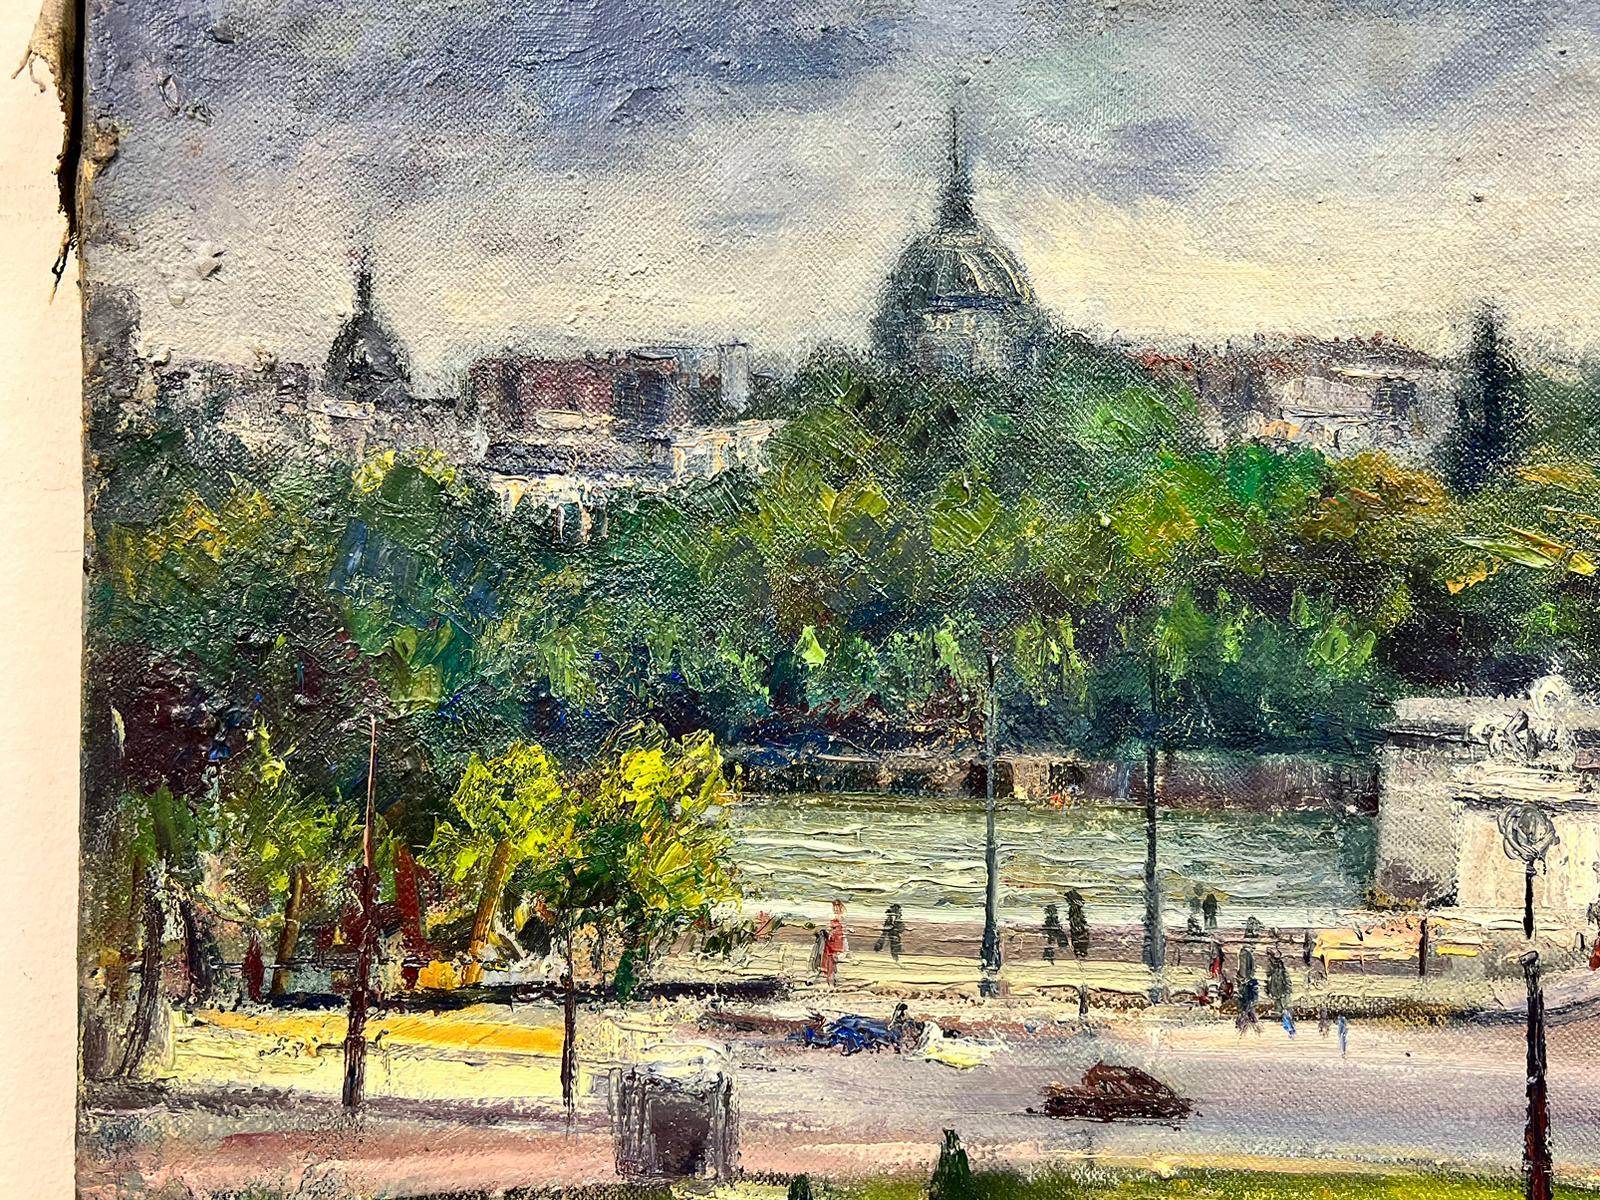 Paris
by Josine Vignon (French 1922-2022)
signed
oil painting on canvas, unframed

canvas: 18 x 26 inches

Colors: Green colors, grey, blue, brown and yellow

Very good condition, though the stretcher bar indentation shows at the top edge.